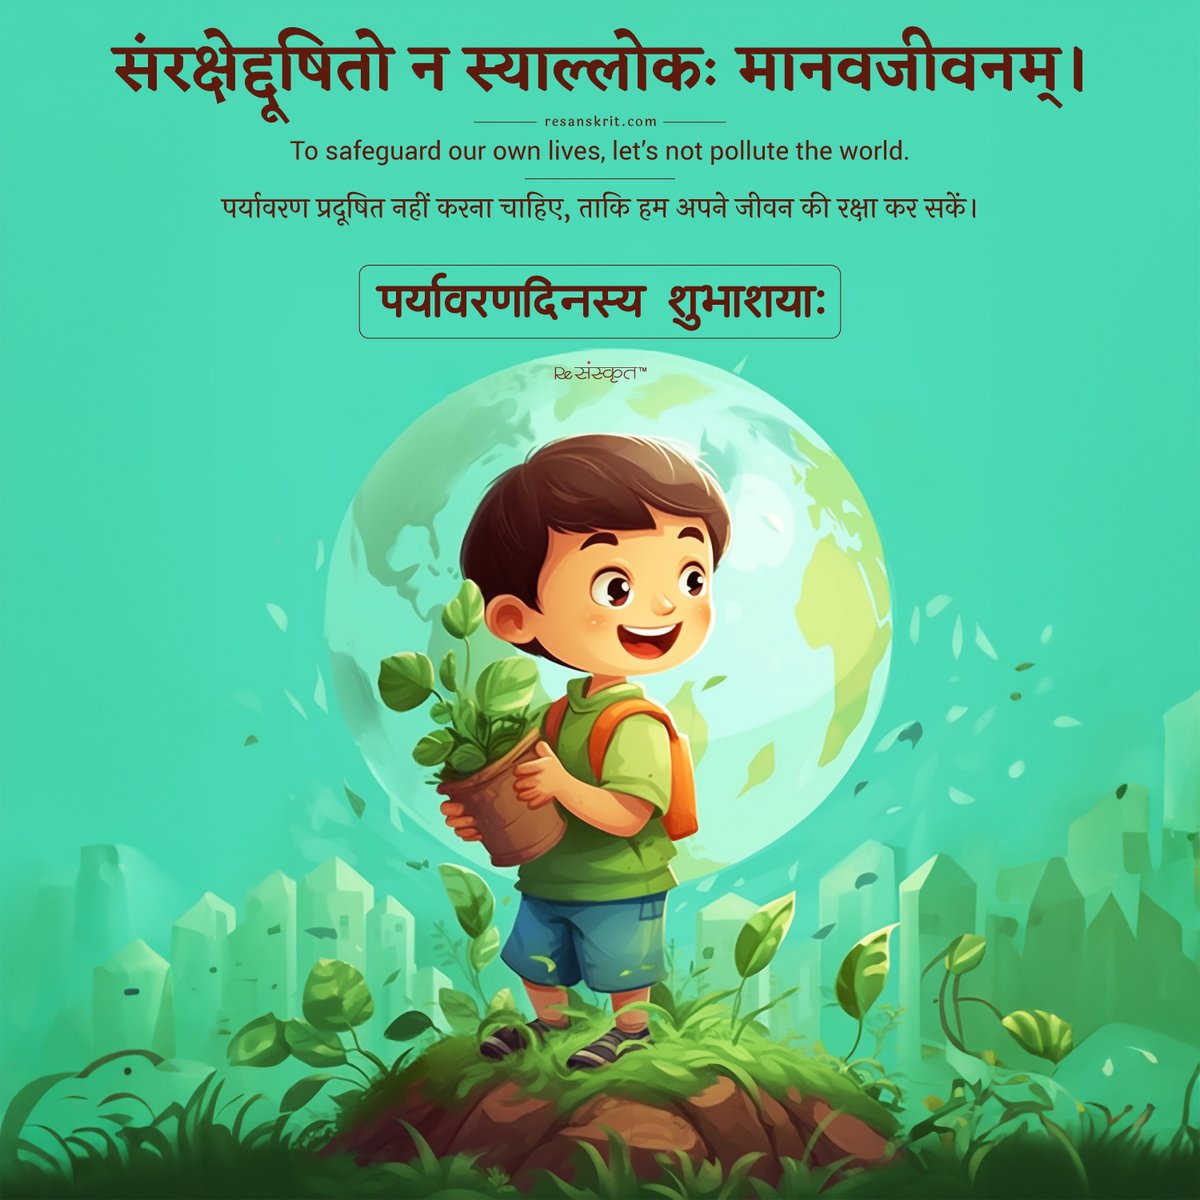 At least for the selfish reason of our own survival, we should not pollute our planet.
पर्यावरणदिनस्य शुभाशयाः । 

#sanskrit #worldenvironmentday #saveearth #climatechange #stopclimatechange #quote #qouteoftheday #greenhouse #globalwarming #climatecrisis #zerowaste #savetheplanet